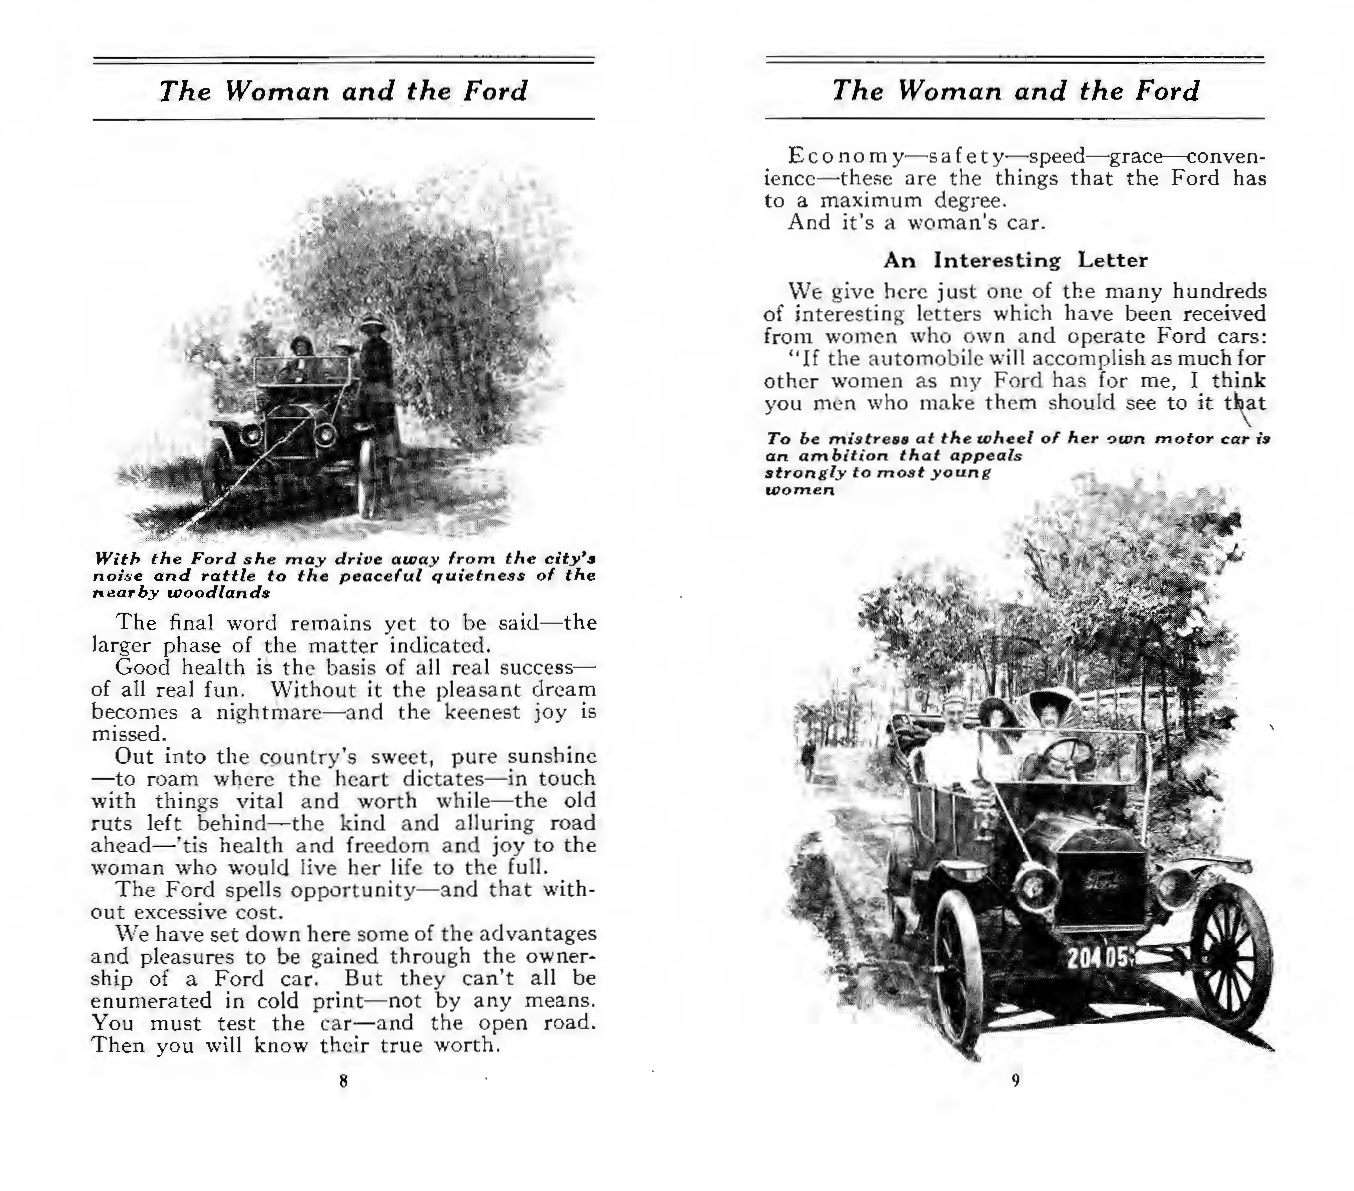 n_1912 The Woman & the Ford-08-09.jpg